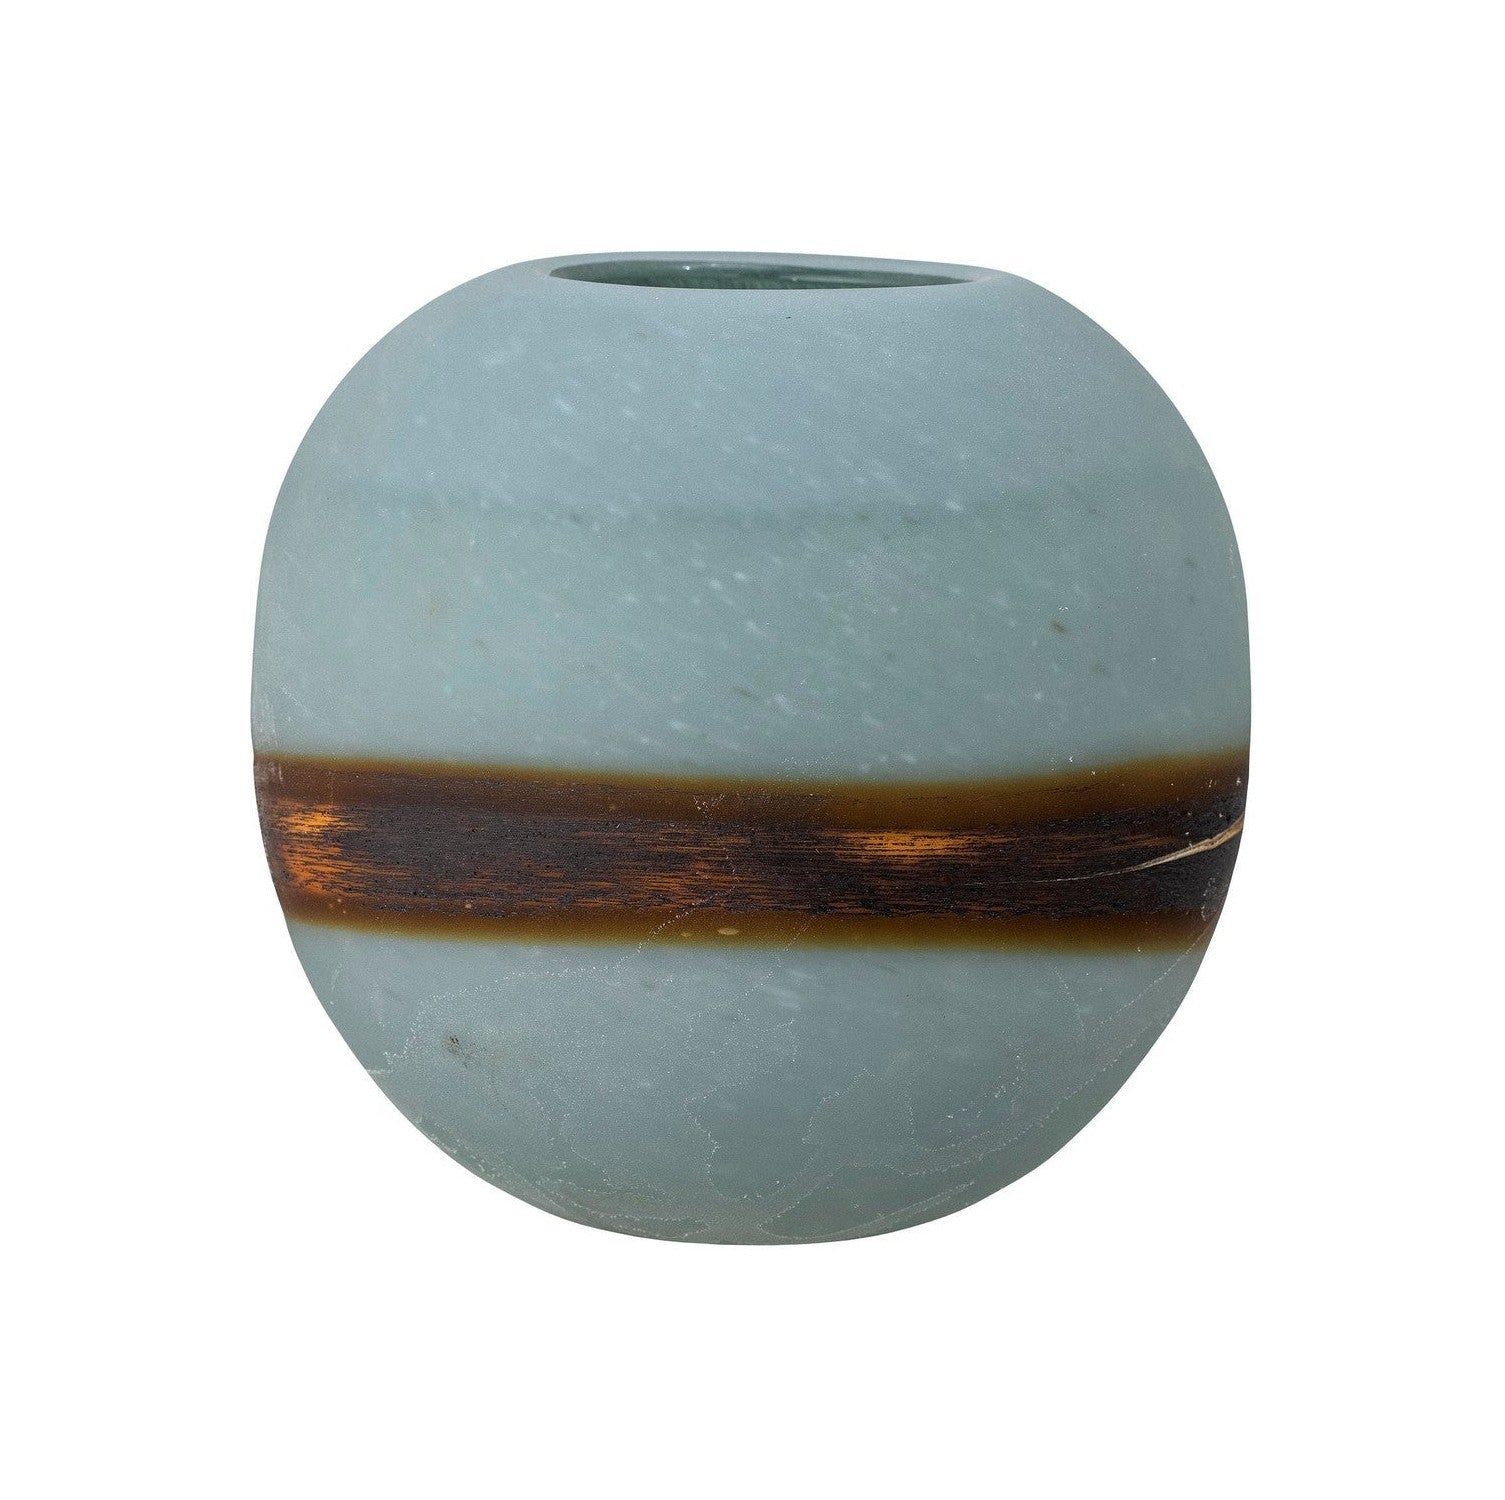 Creative Collection Melike Vase, Blue, Glass